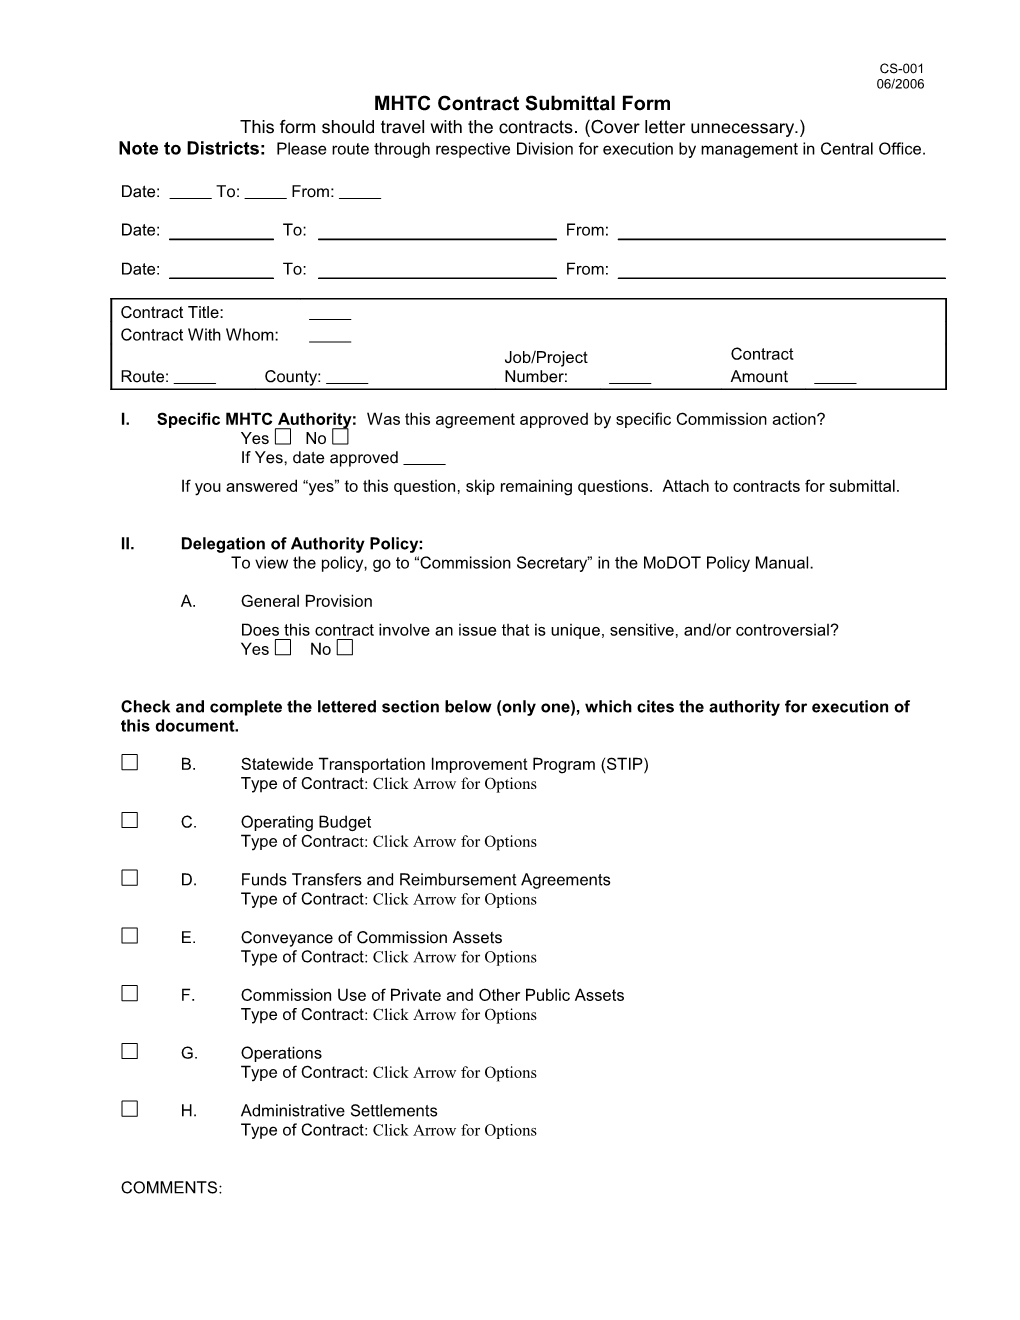 MHTC Contract Submittal Form